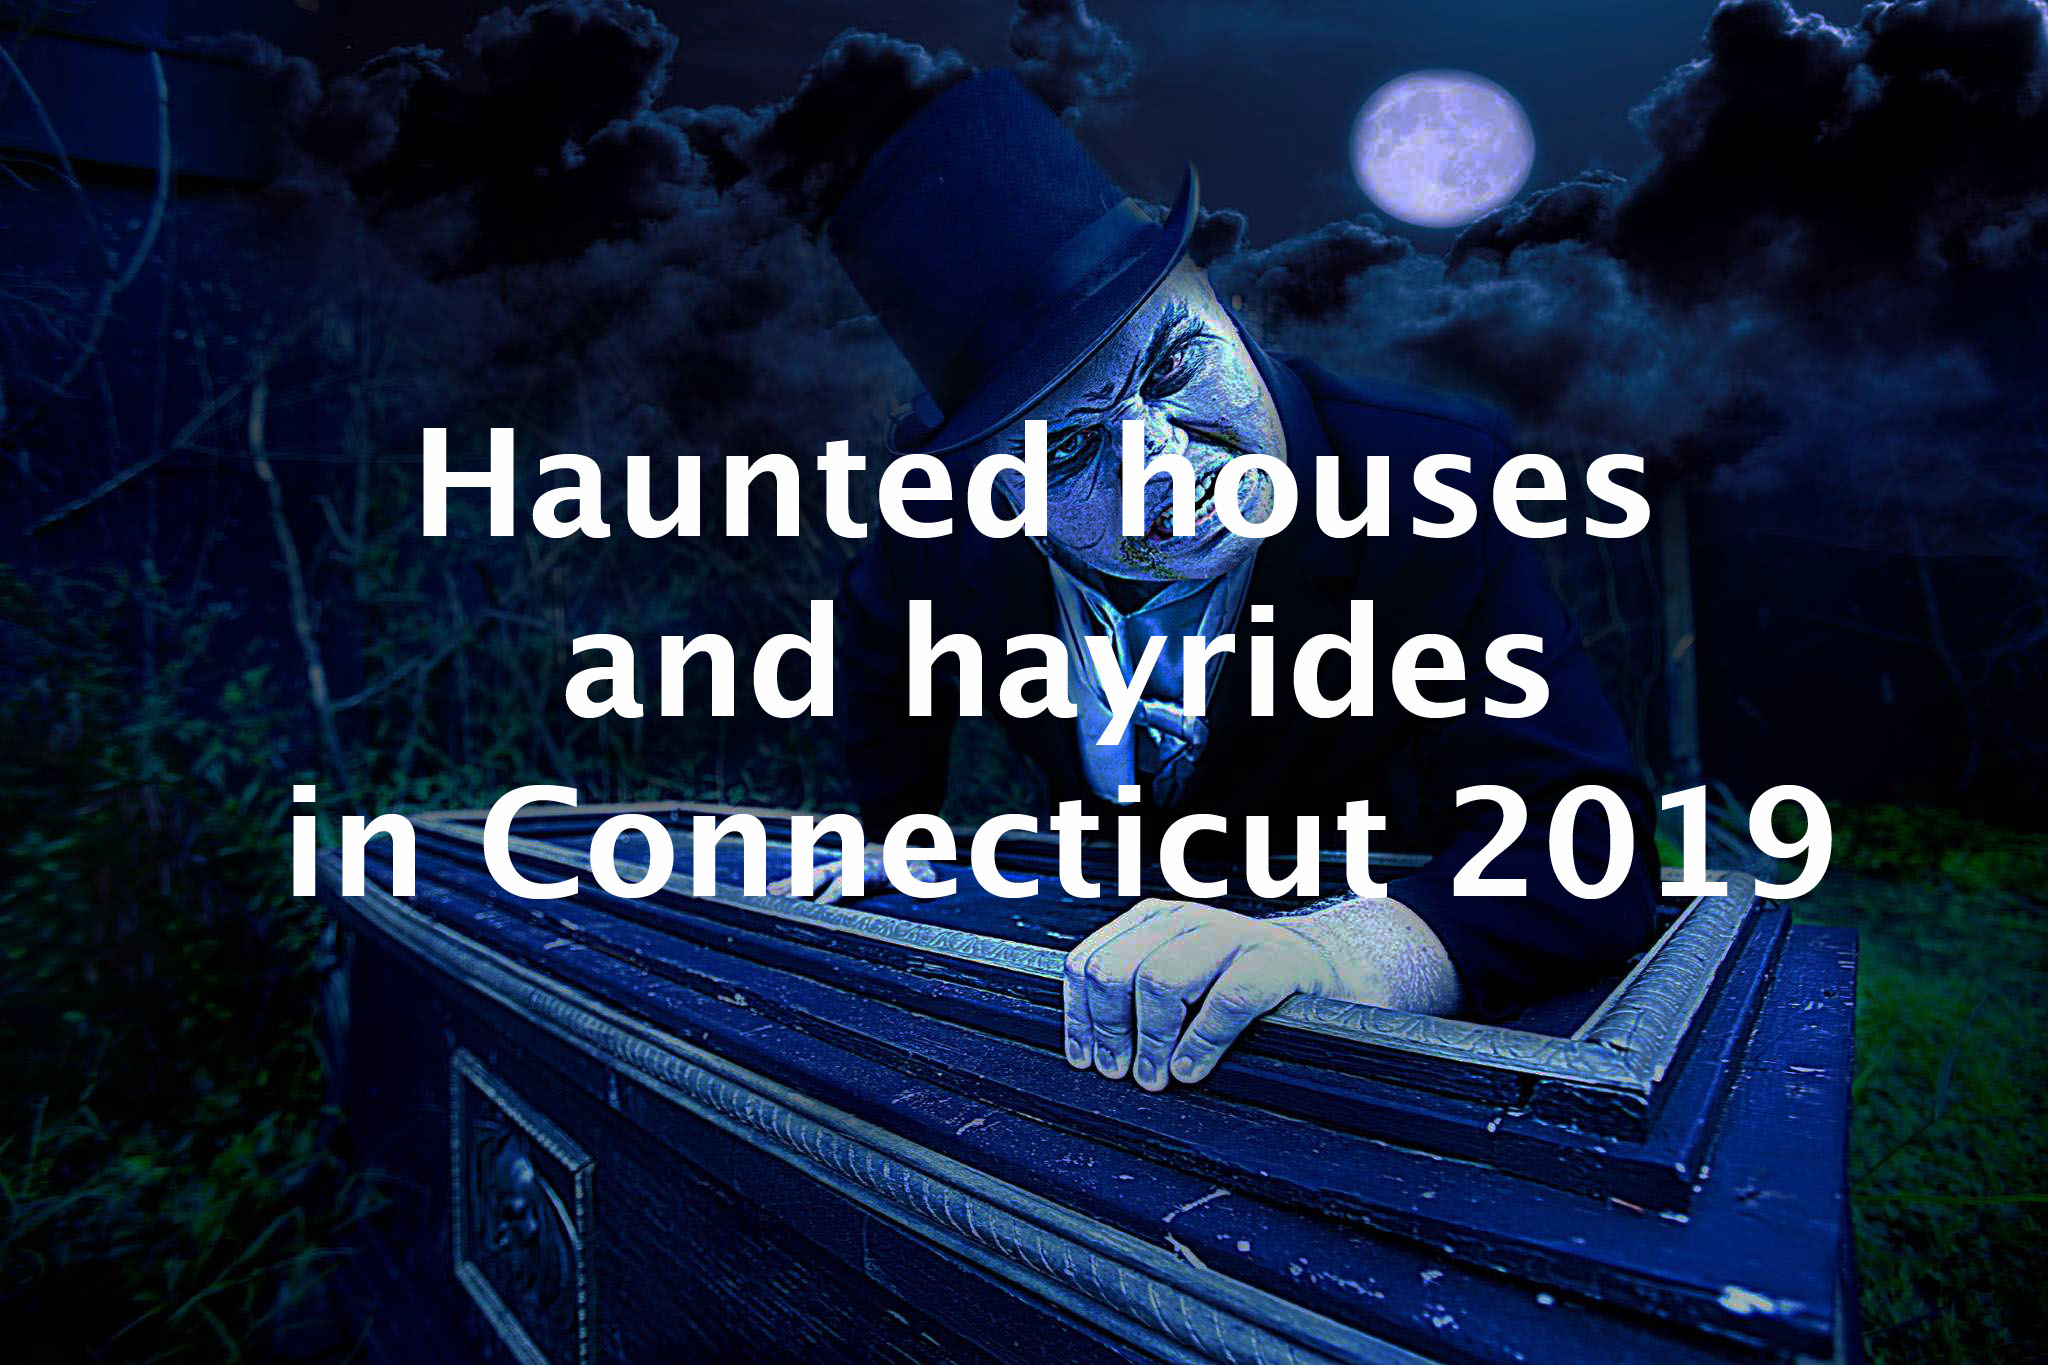 Guide to haunted houses and hayrides in Connecticut 2019